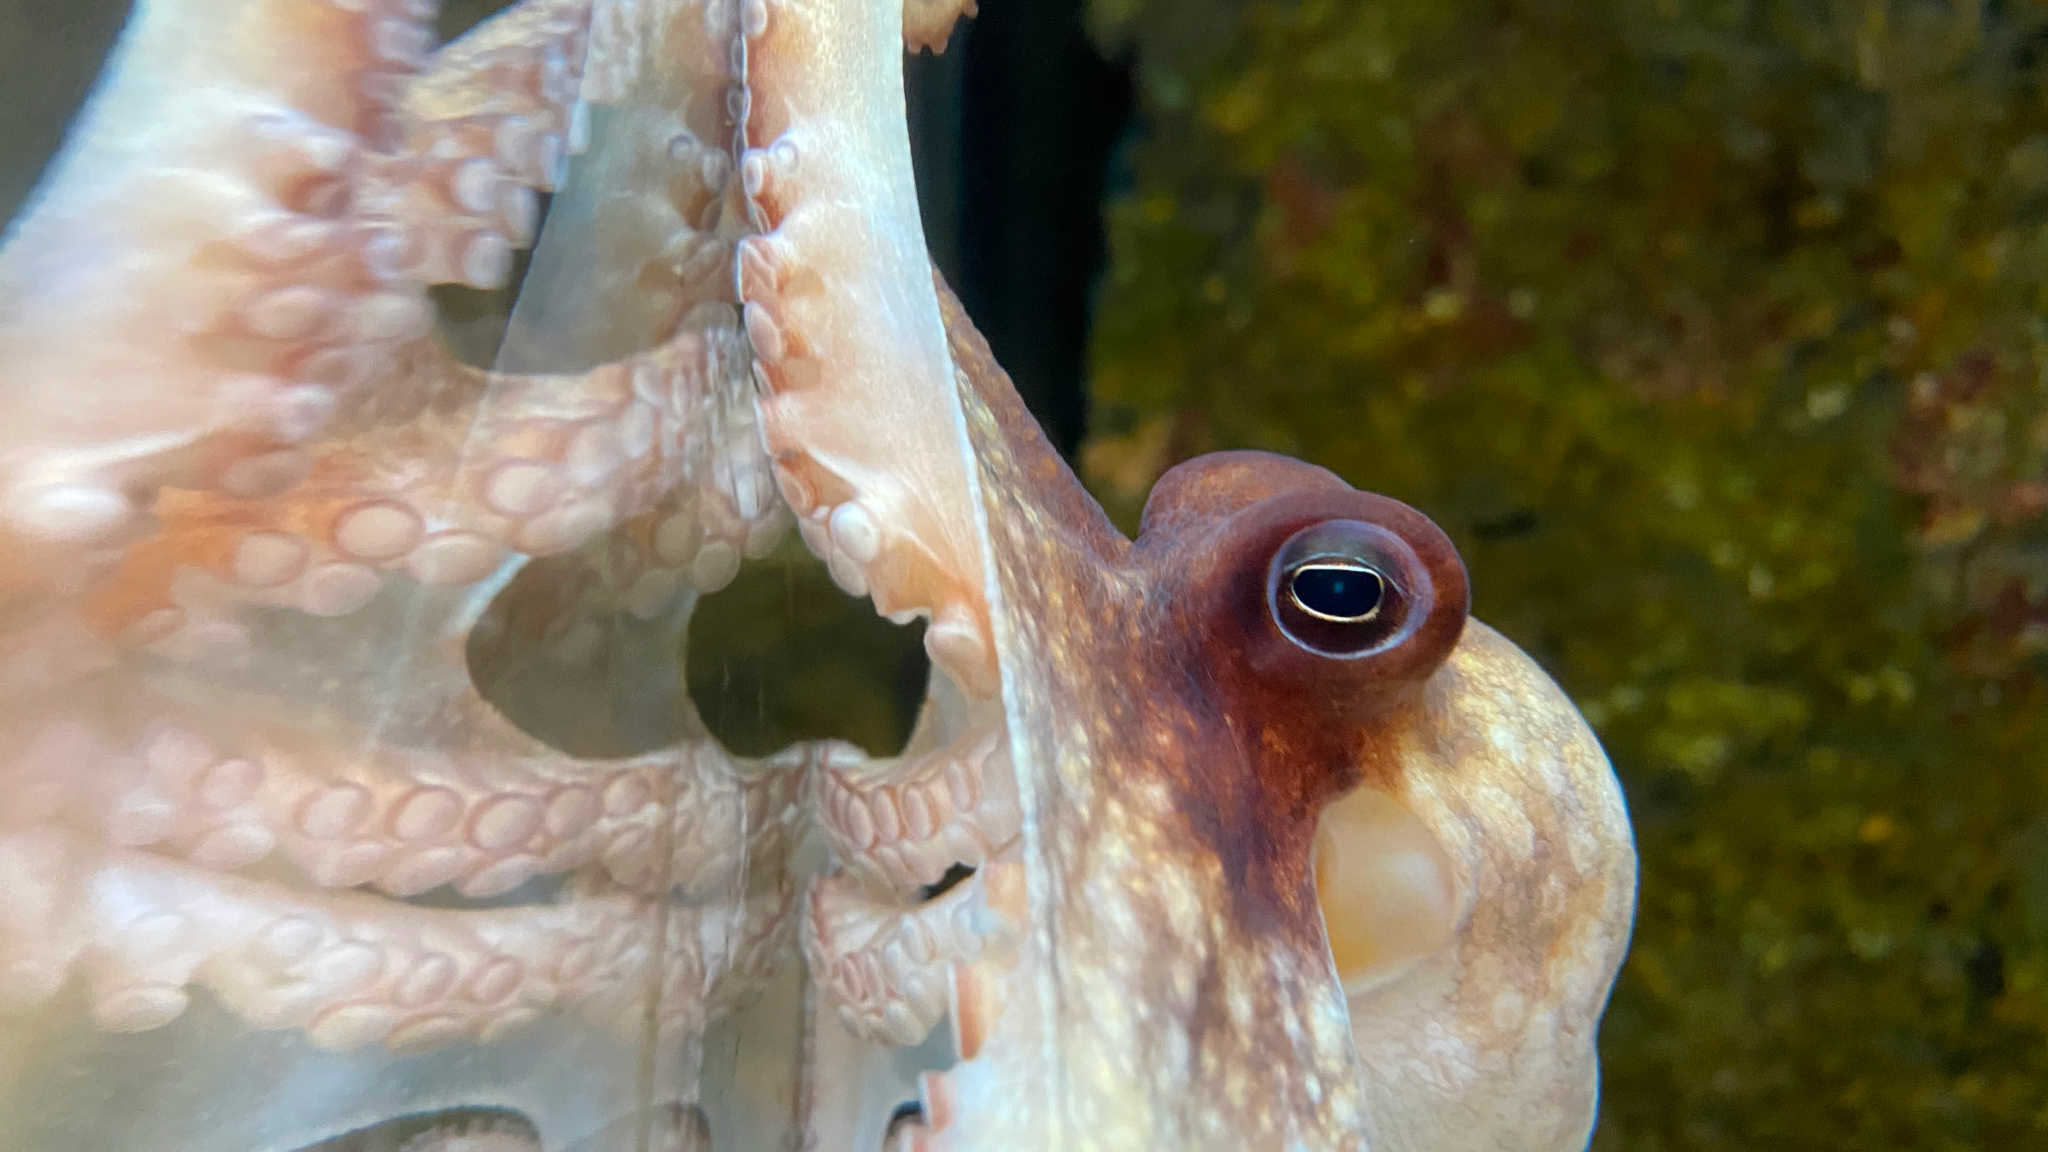 Closeup of octopus inside a tank on the glass